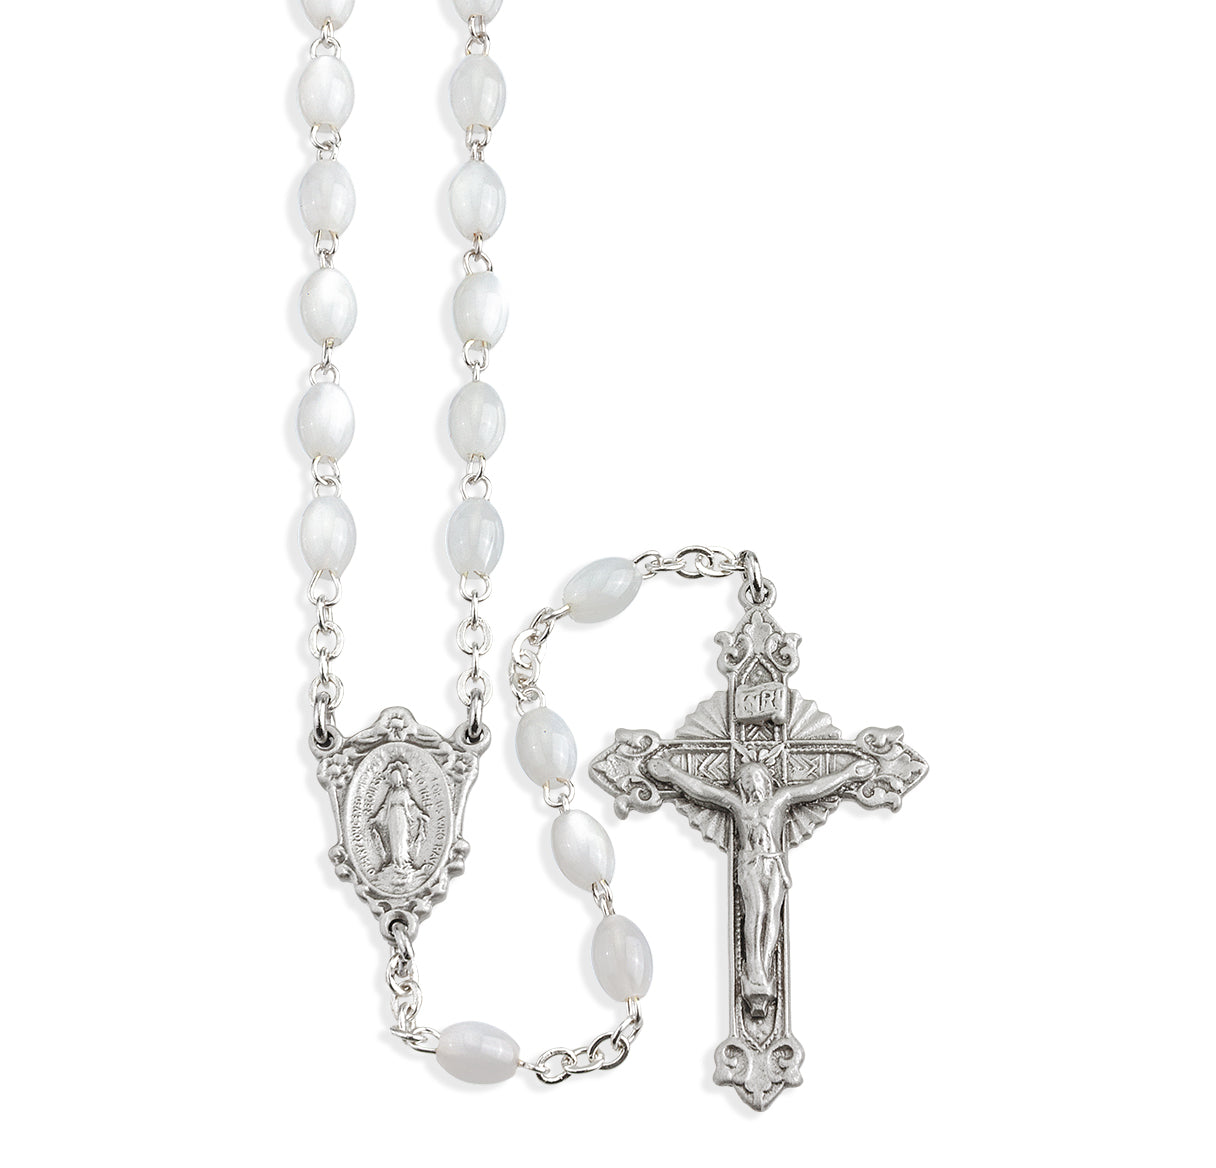 White Imitation Mother of Pearl New England Pewter Rosary